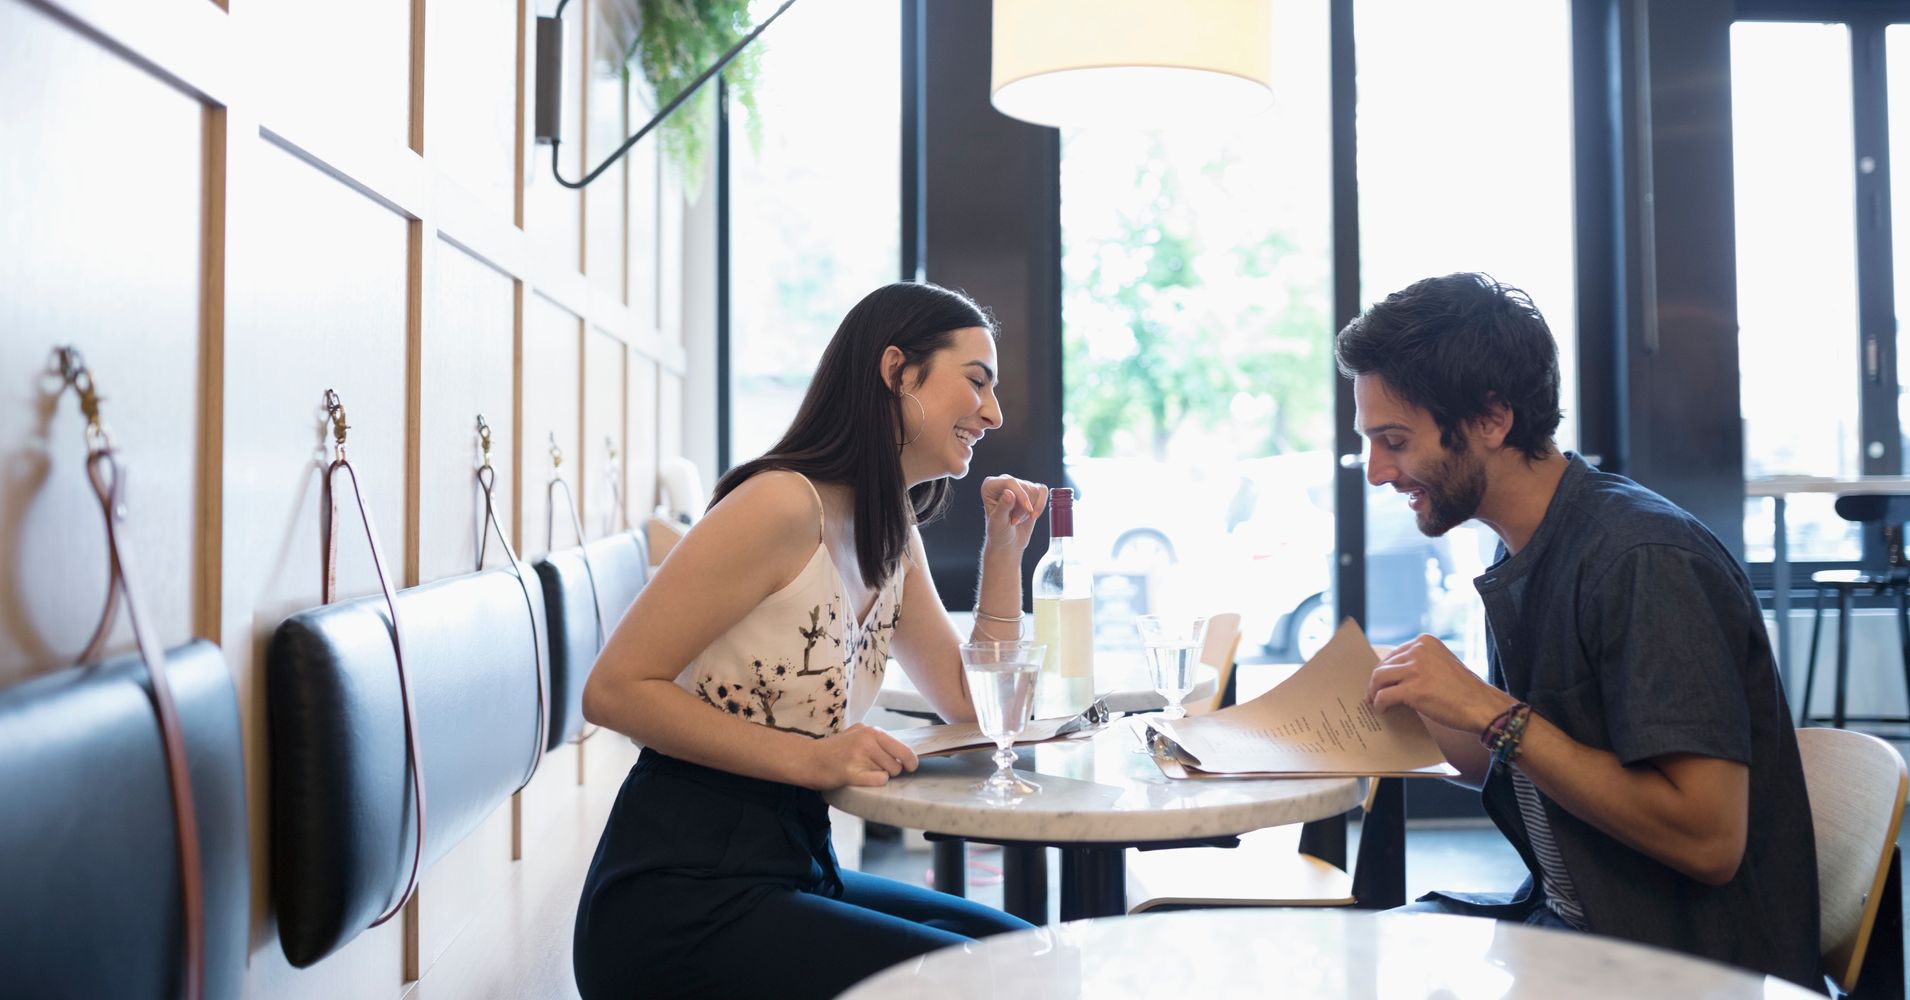 9 Questions To Ask On A First Date According To Divorce Lawyers HuffPost